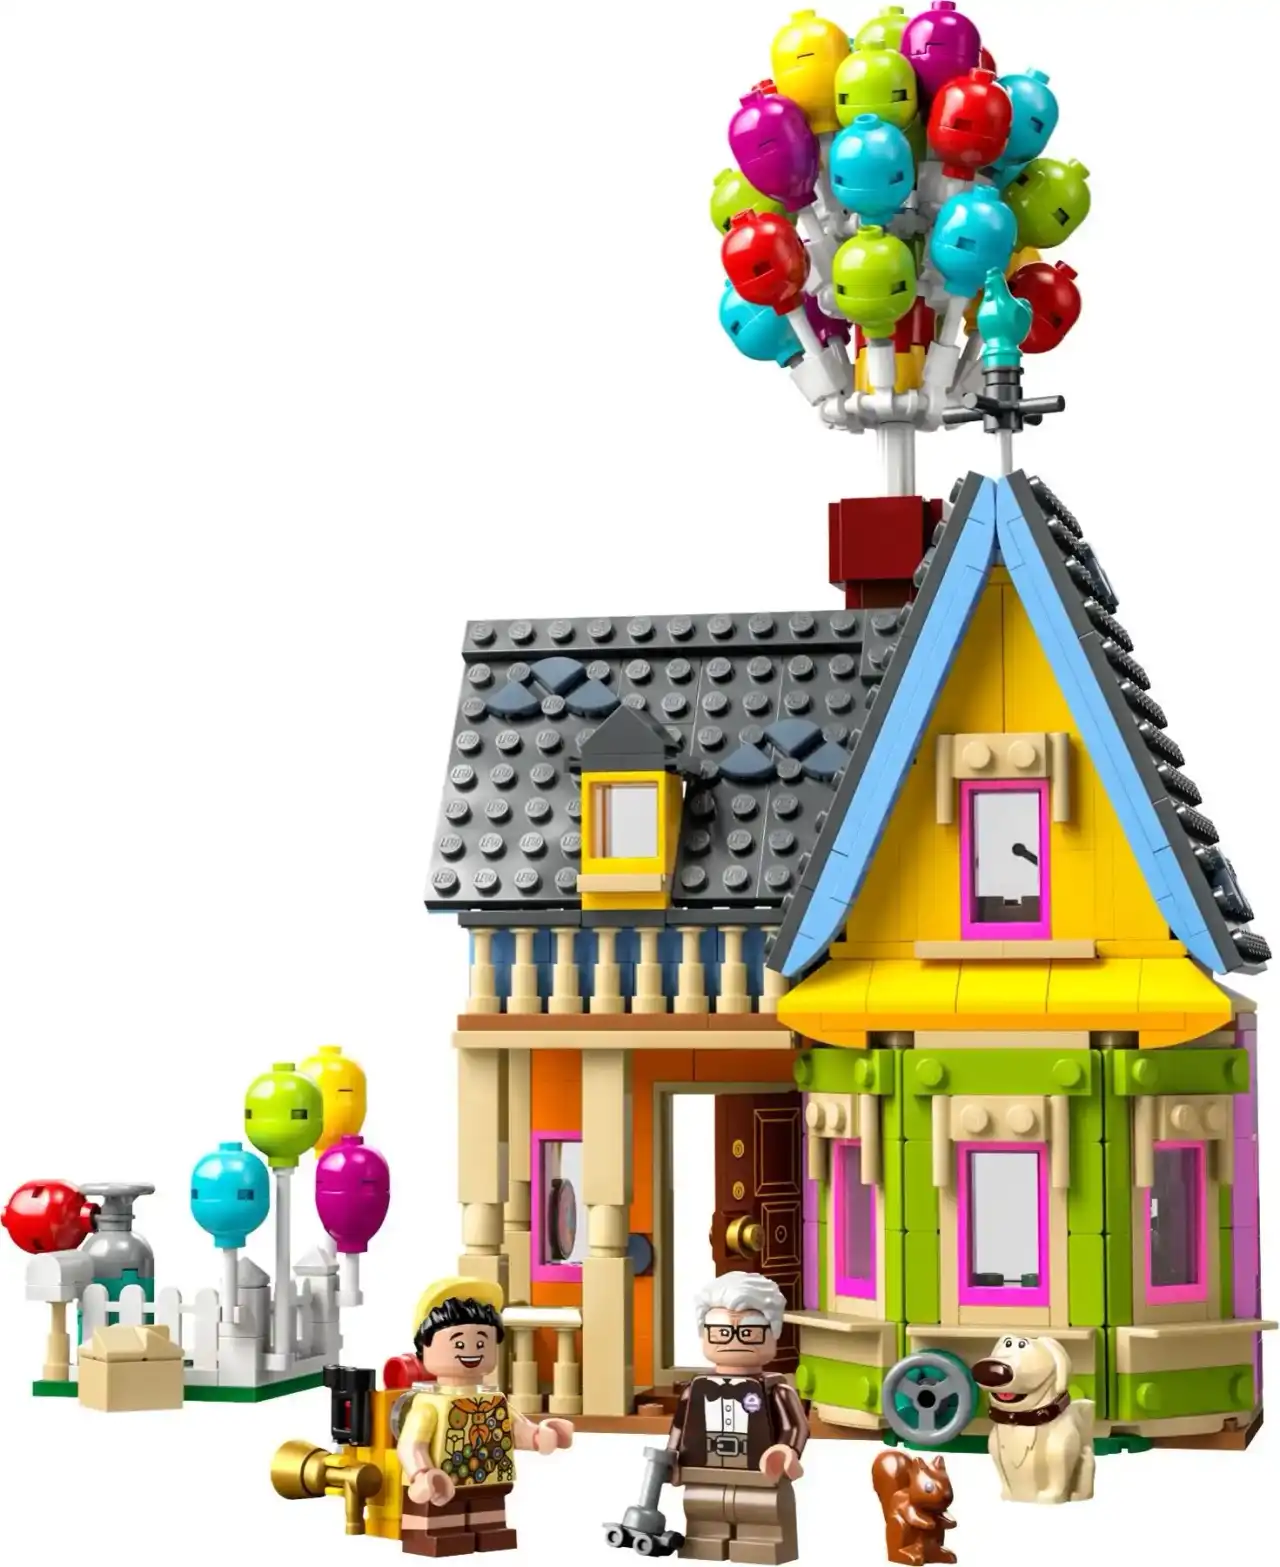 43217 - 'Up' House